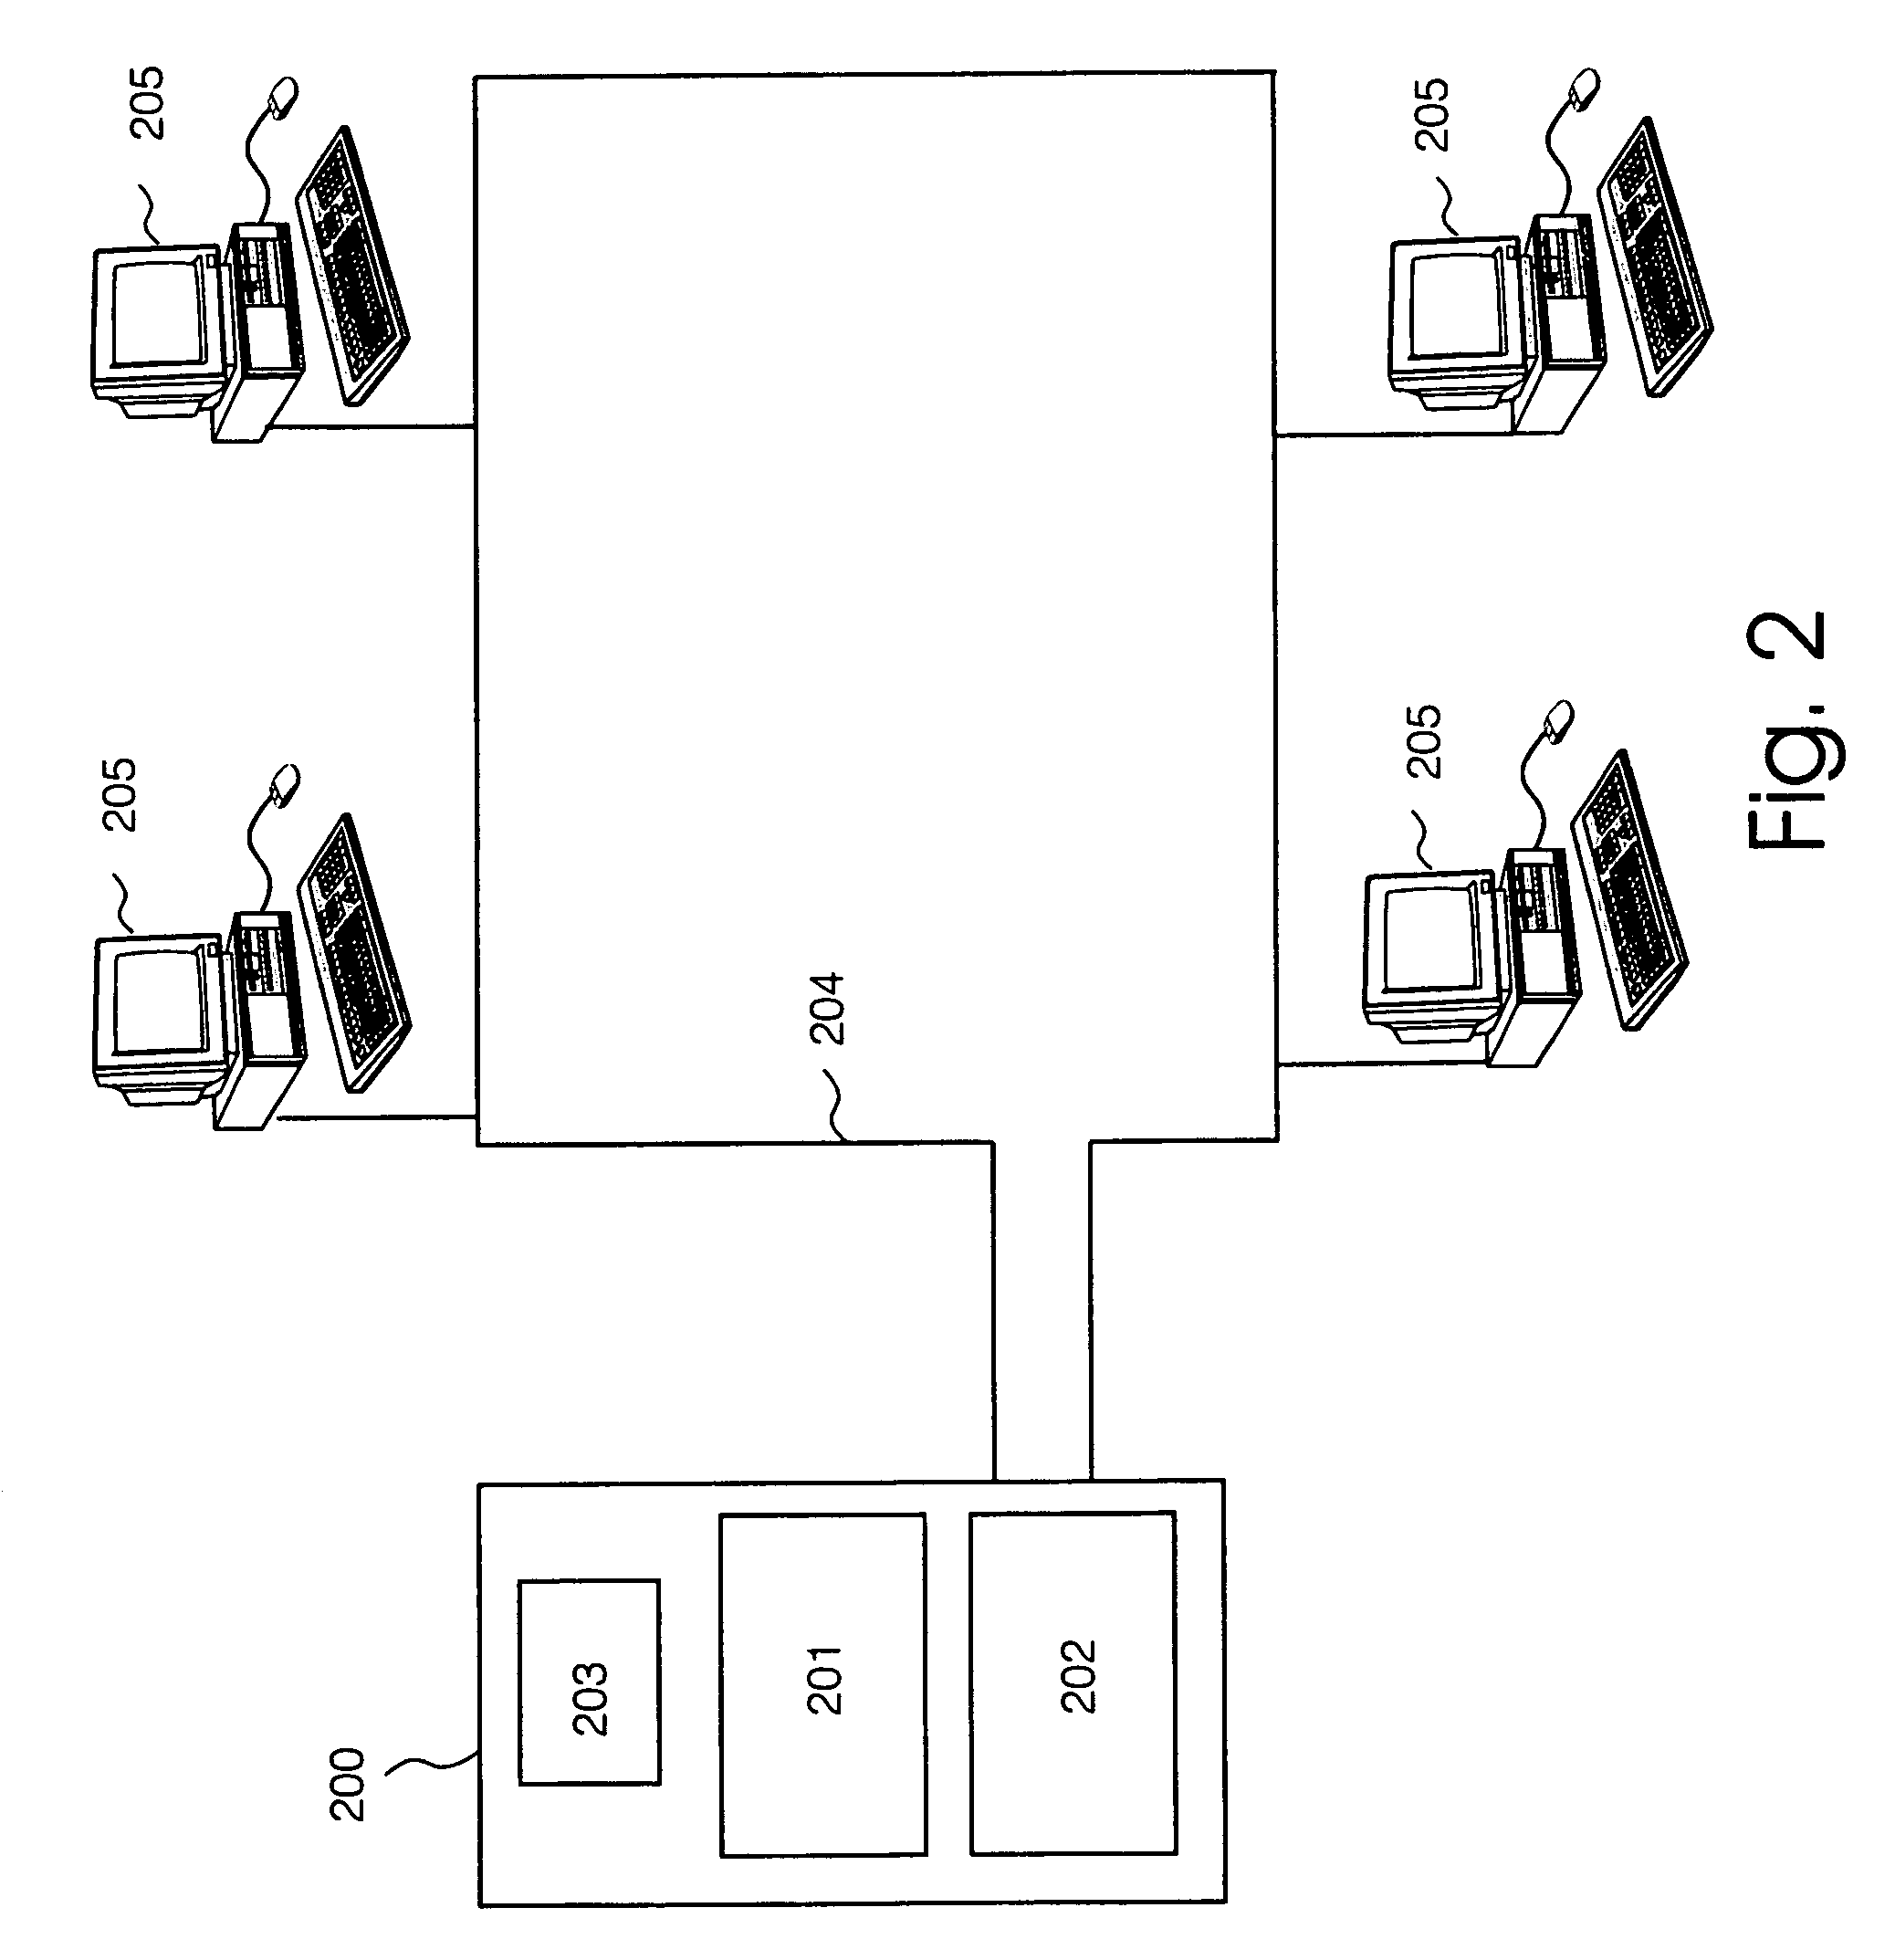 Method of manufacturing operating system master template, method of manufacturing a computer entity and product resulting therefrom, and method of producing a production version of an operating system